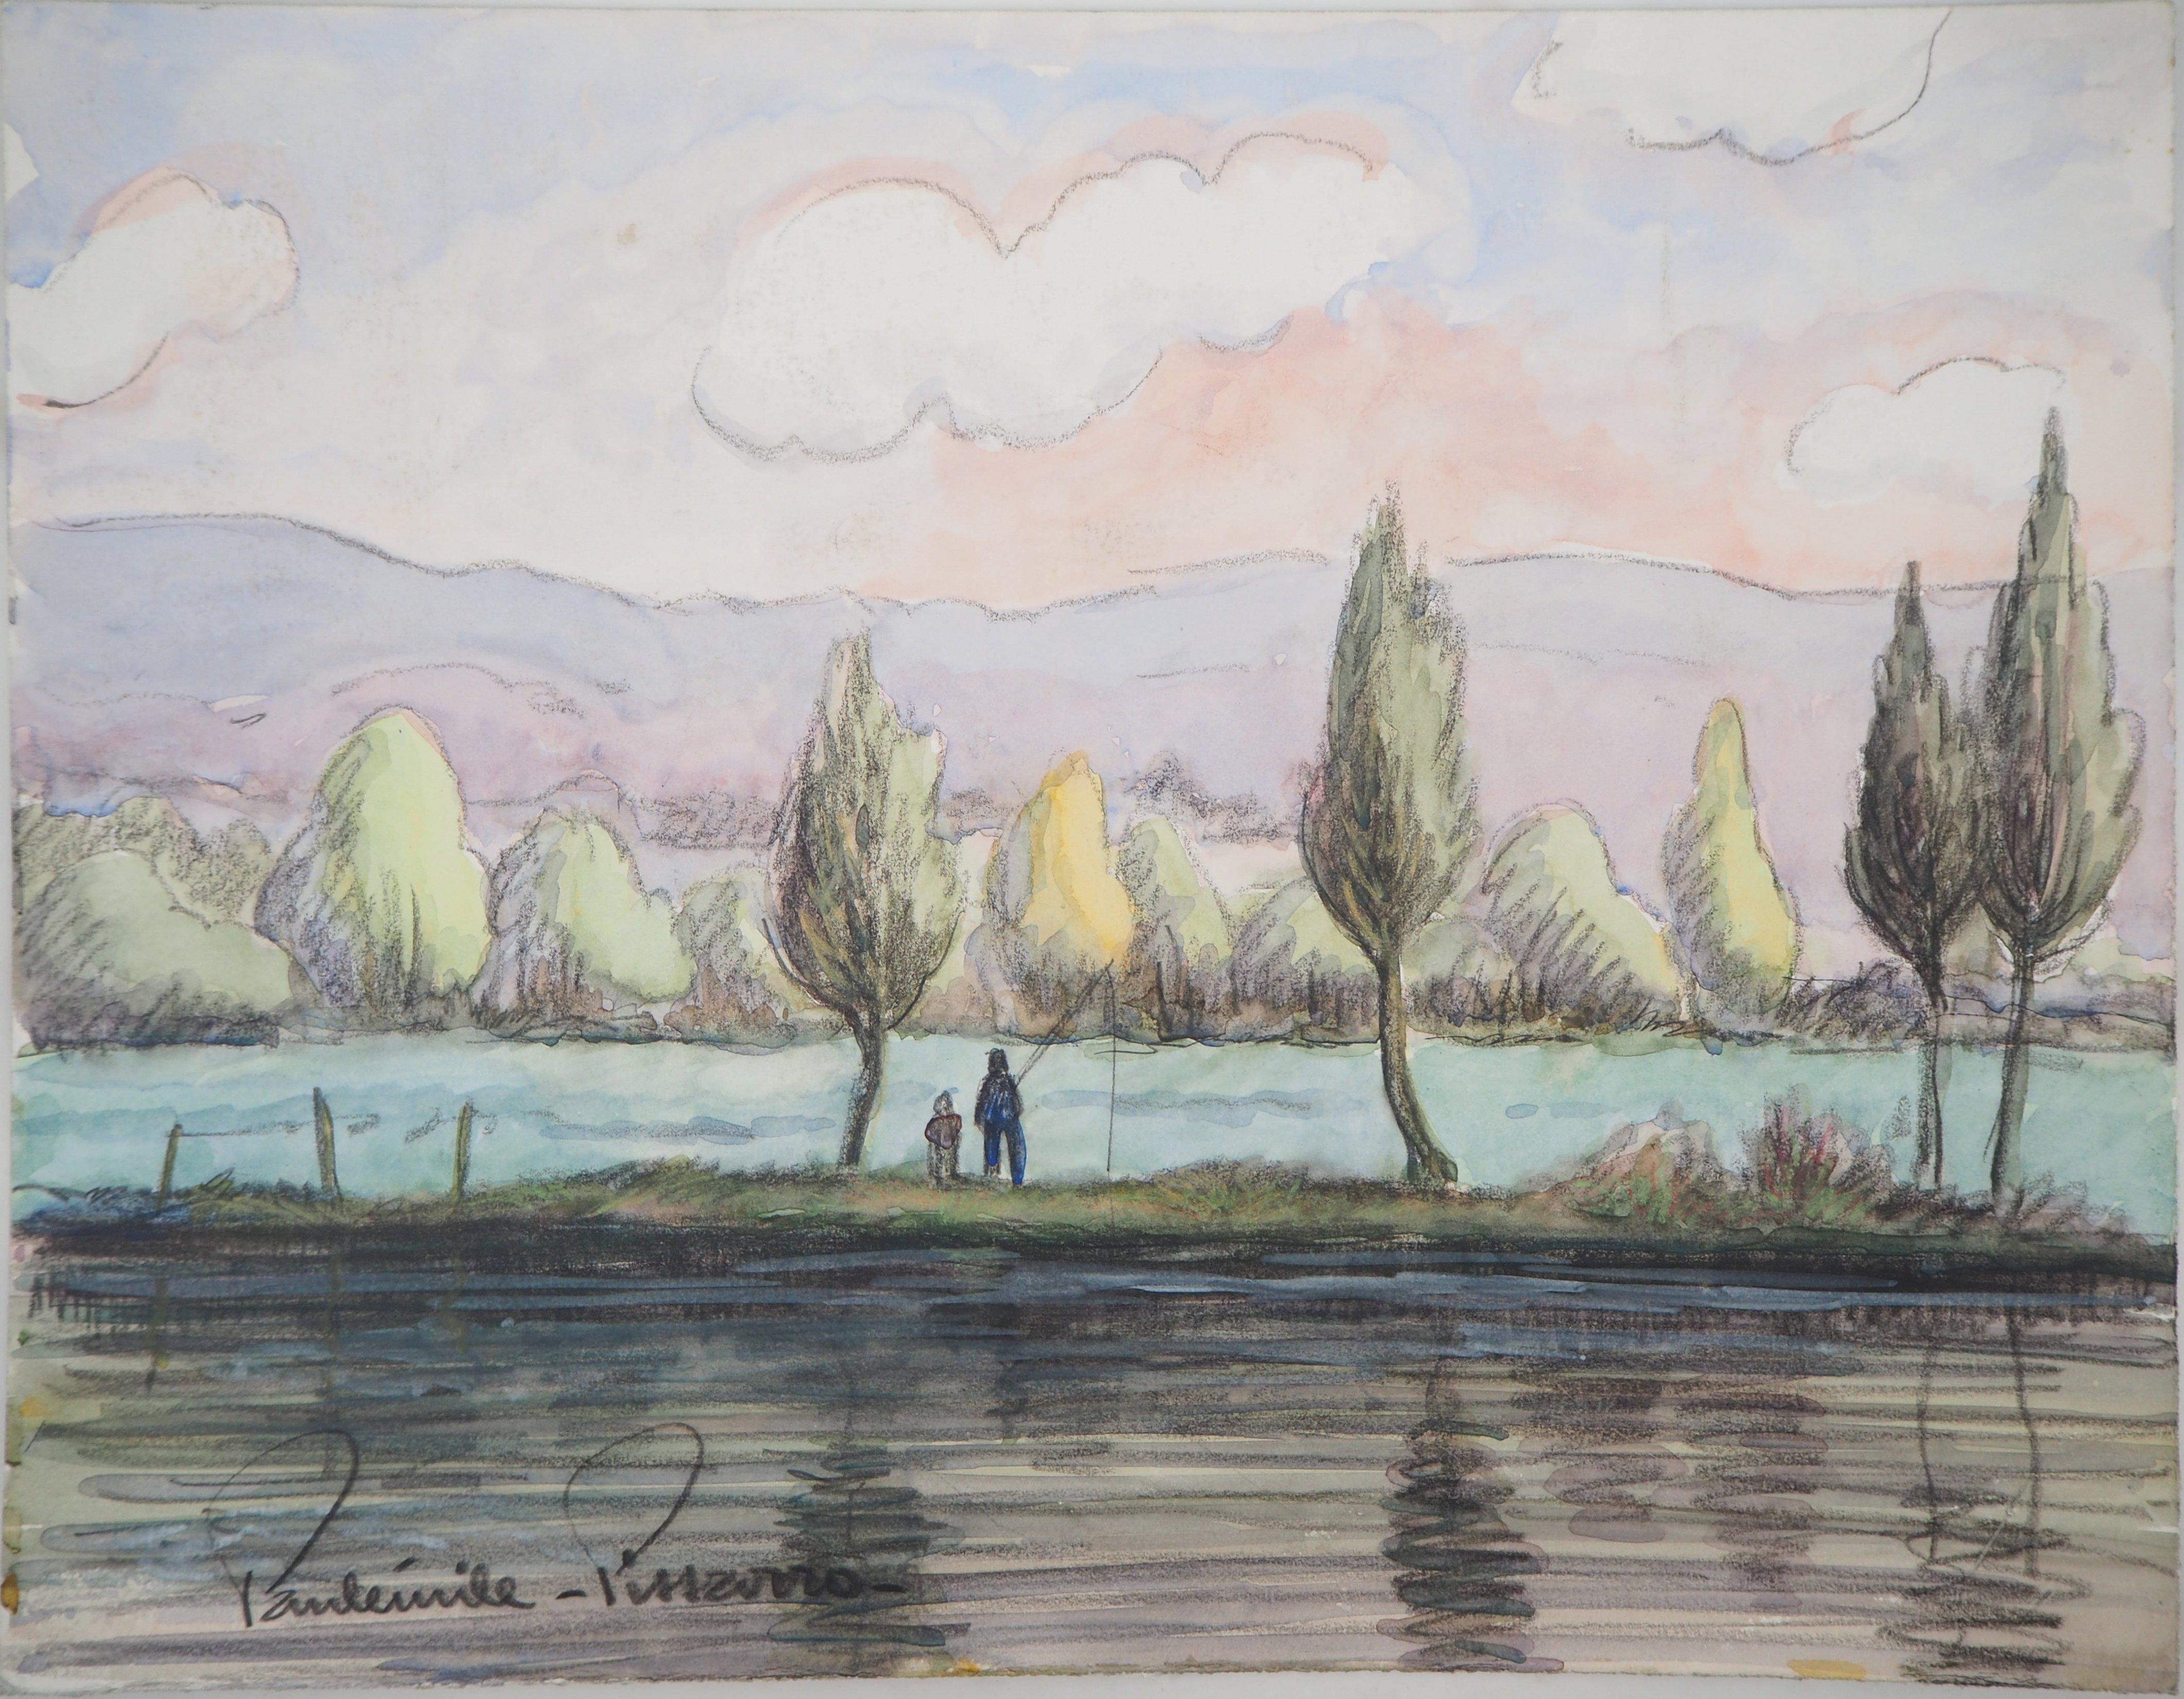 Paul Emile Pissarro Landscape Art - Father and Son Fishing in the Morning - Original watercolor painting - Signed